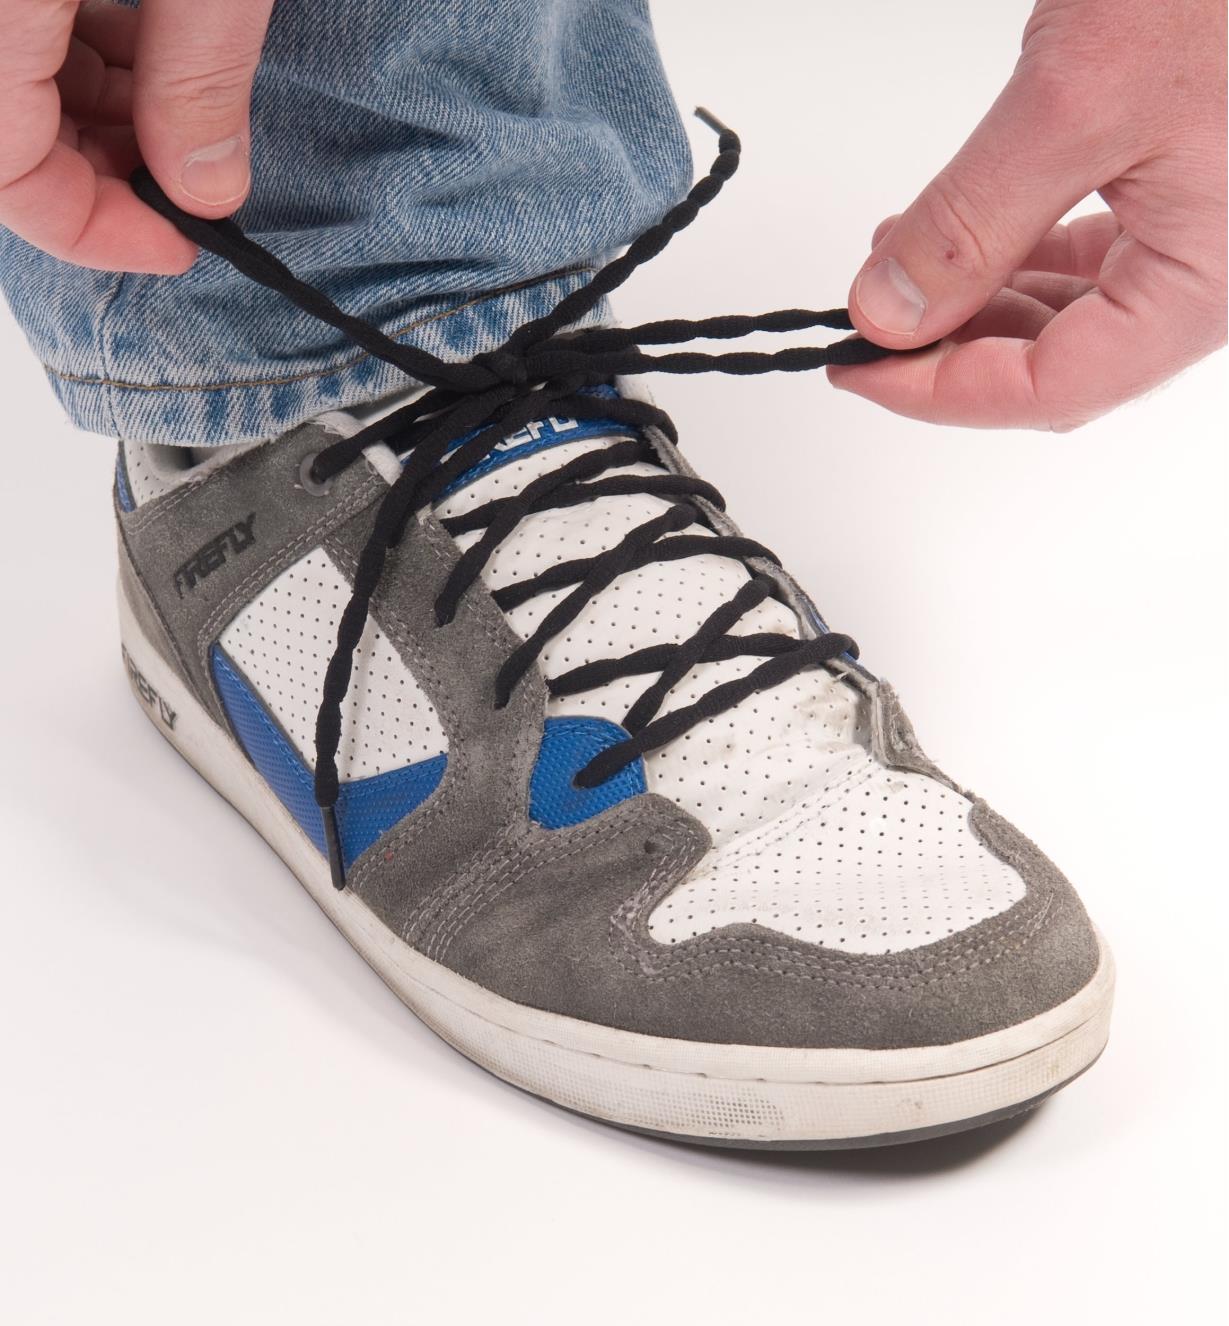 Tying a lace on a running shoe